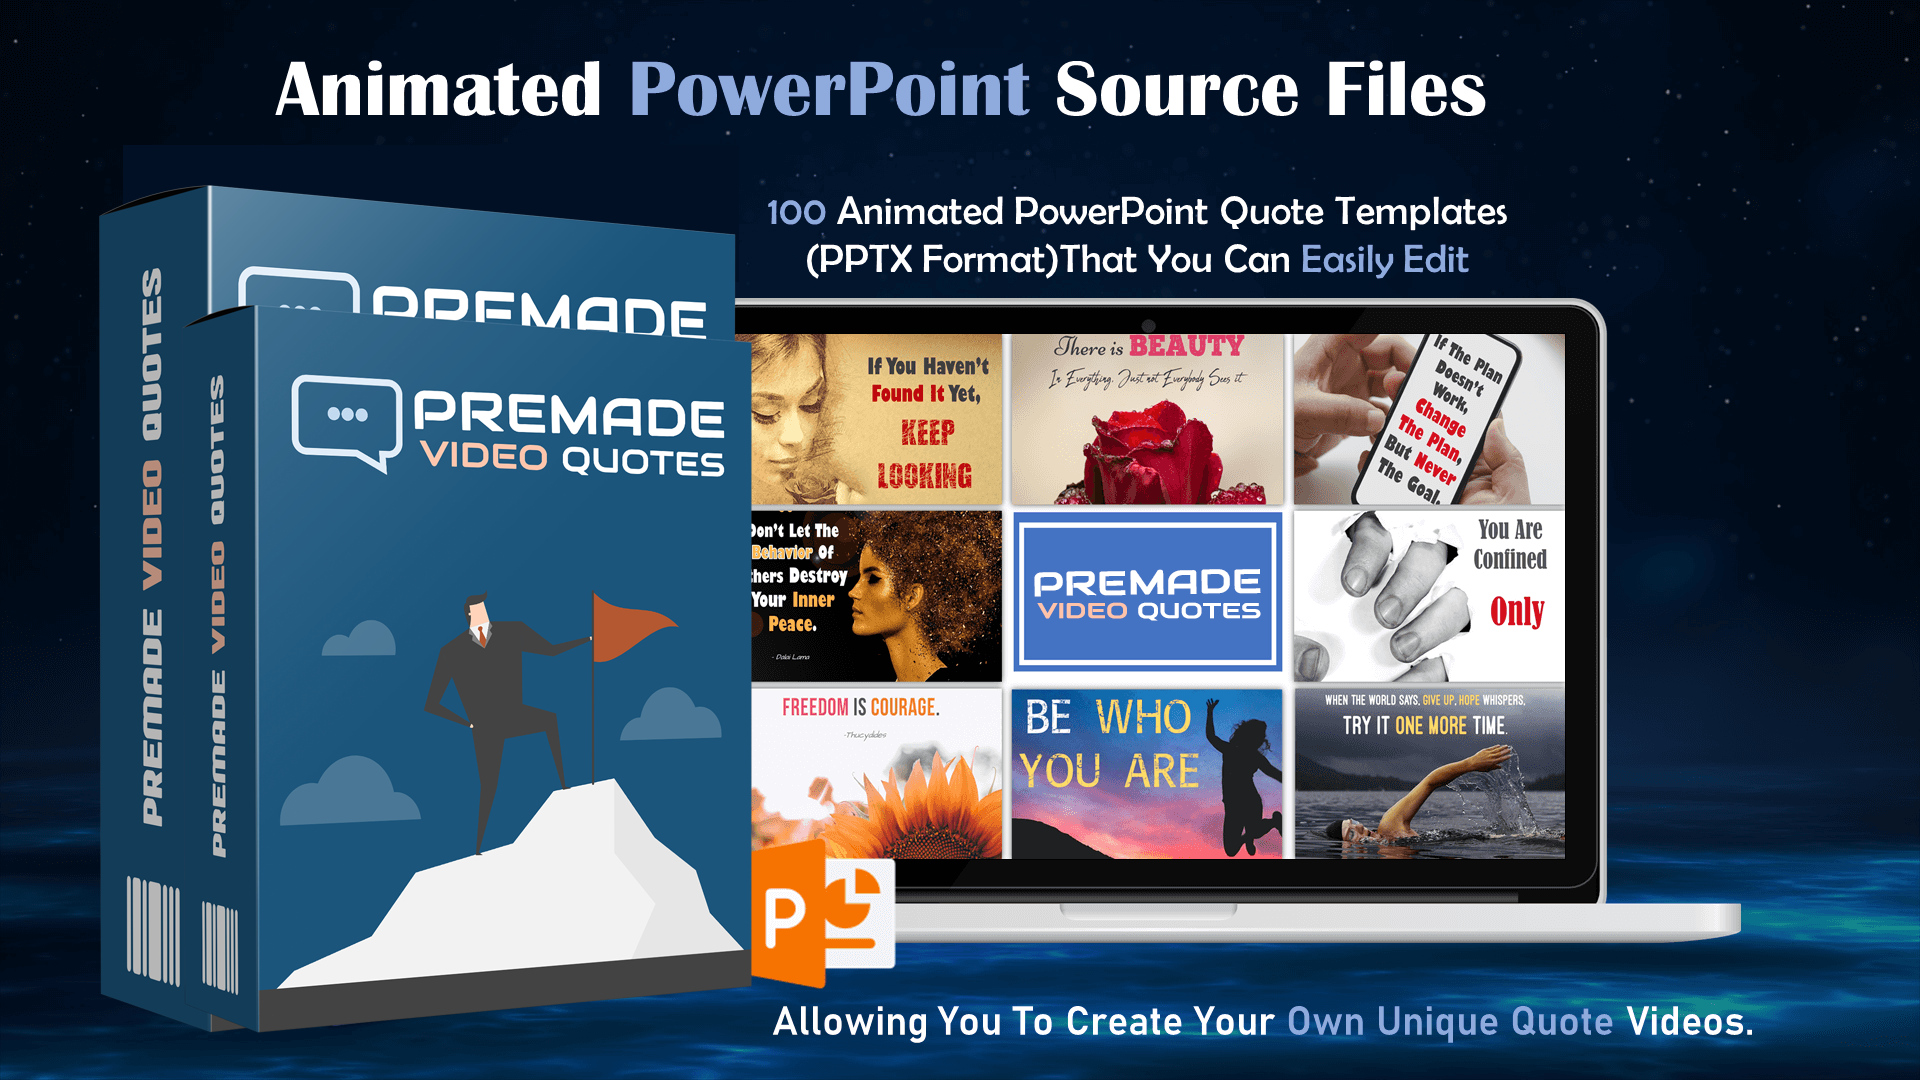 Powerpoint_Source_Files